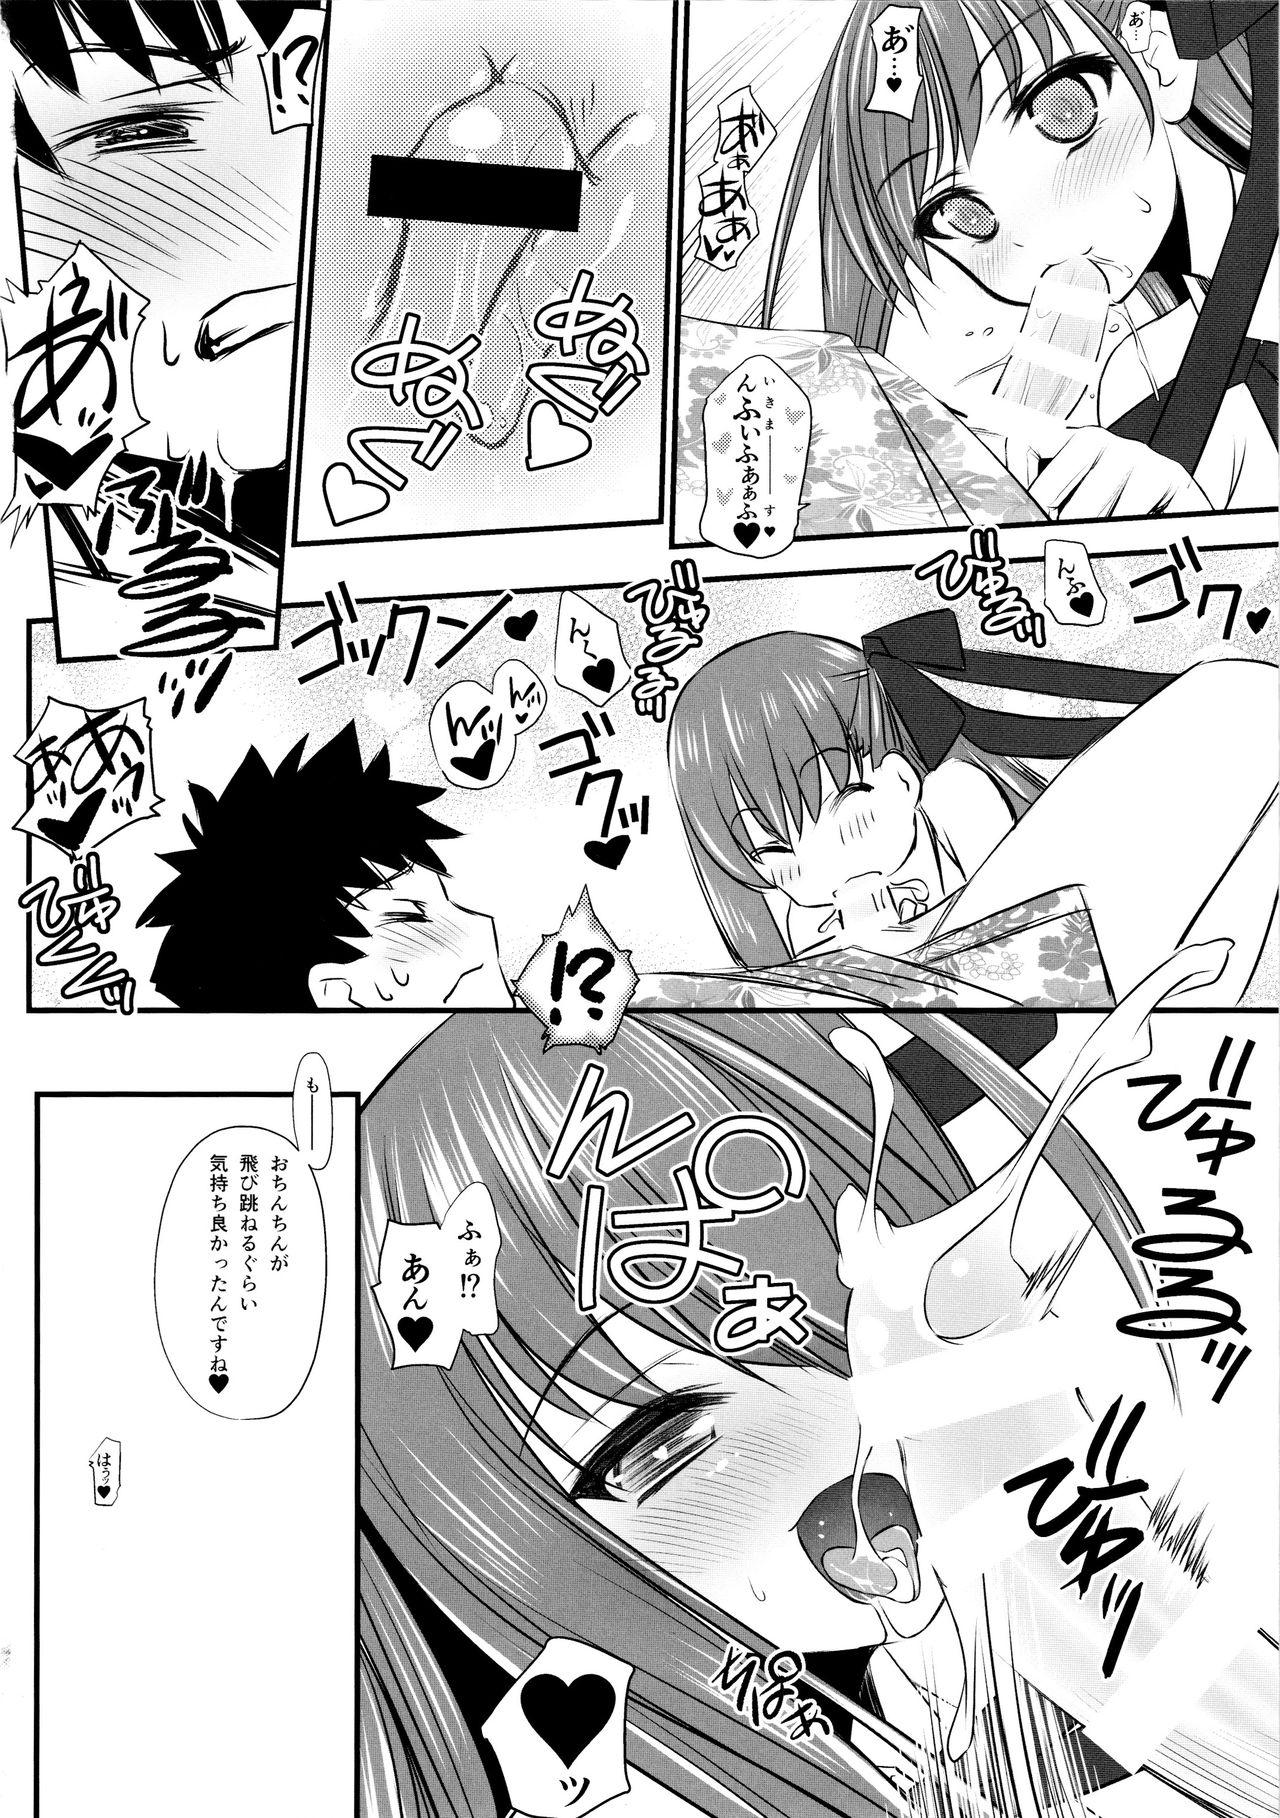 Fodendo (C96) [Yakan Honpo (Inoue Tommy)] Queen [Kyuuin] BB-chan (Fate/Grand Order) - Fate grand order Body Massage - Page 6